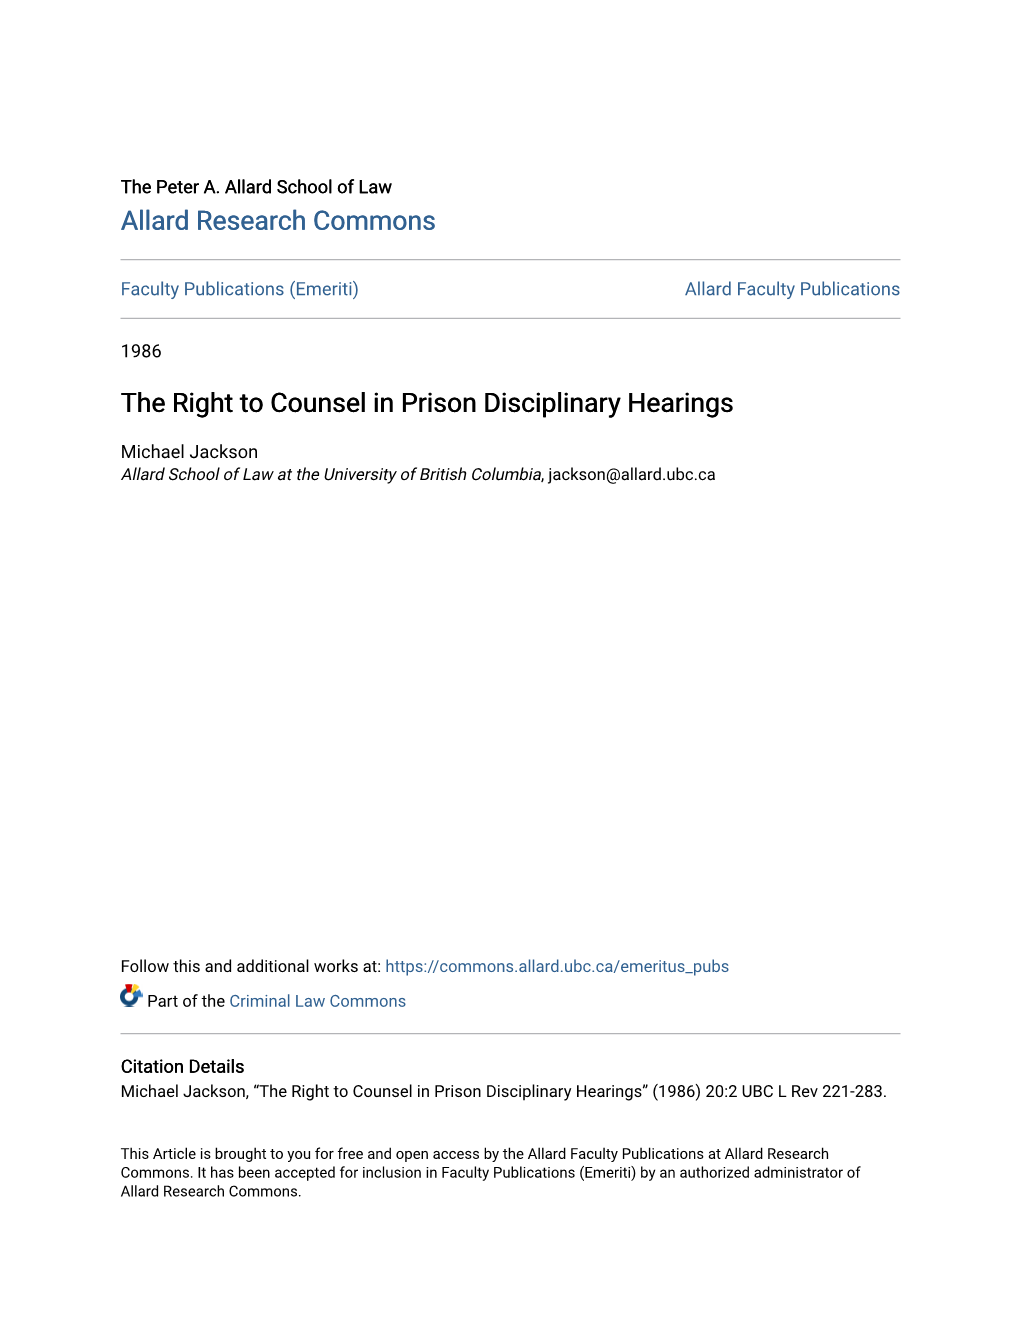 The Right to Counsel in Prison Disciplinary Hearings